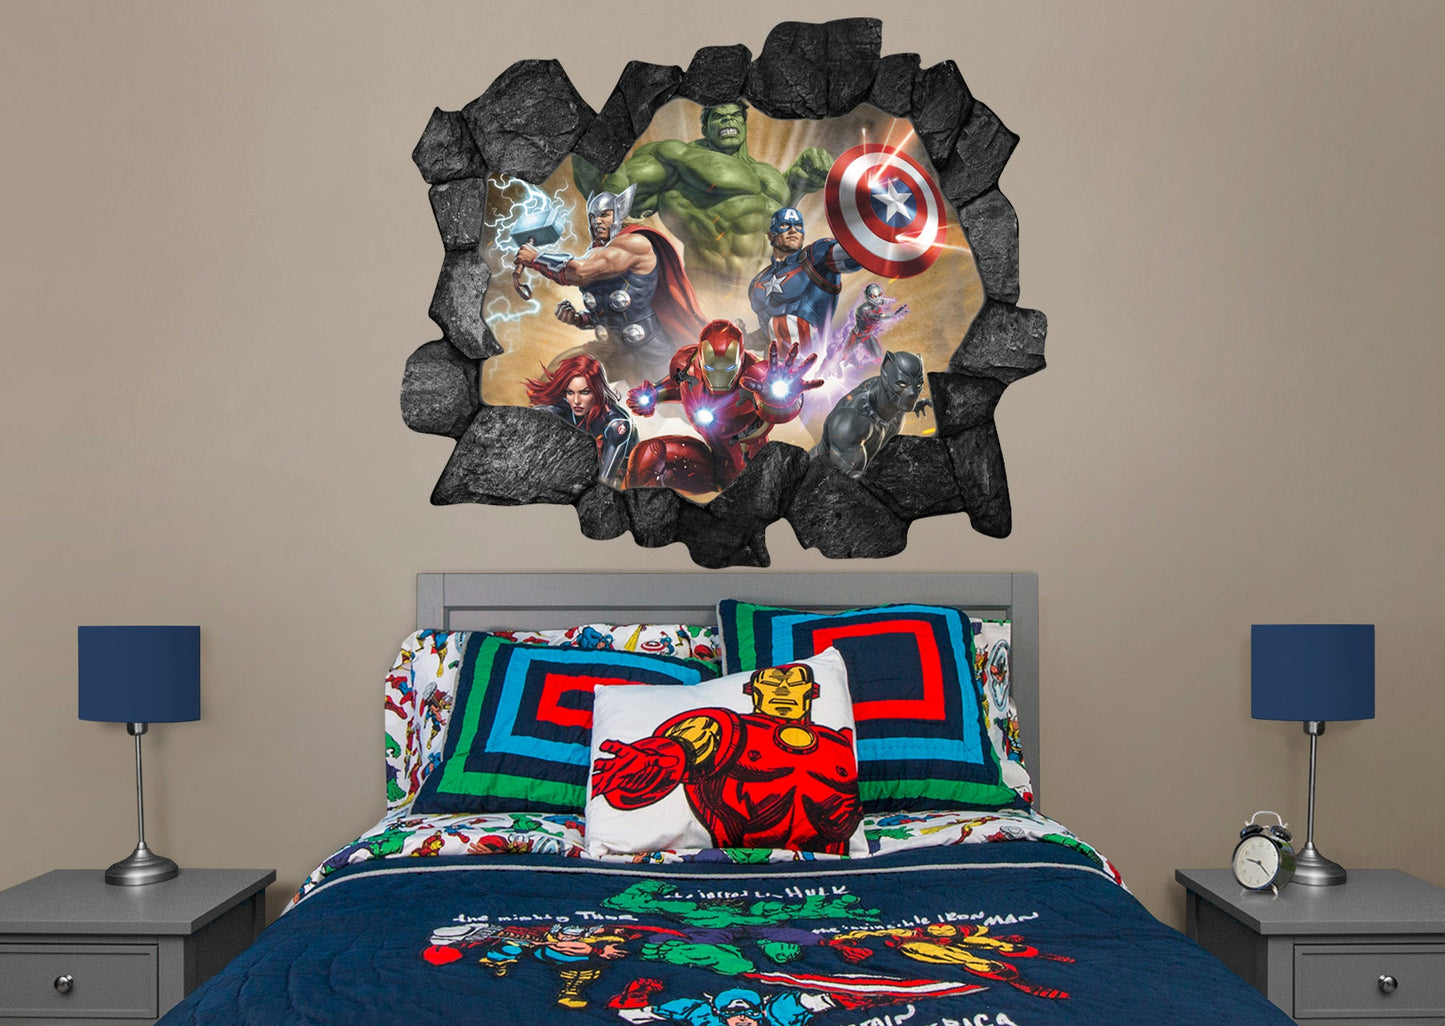 Avengers: Broken Wall 1 Instant Window - Officially Licensed Marvel Removable Adhesive Decal